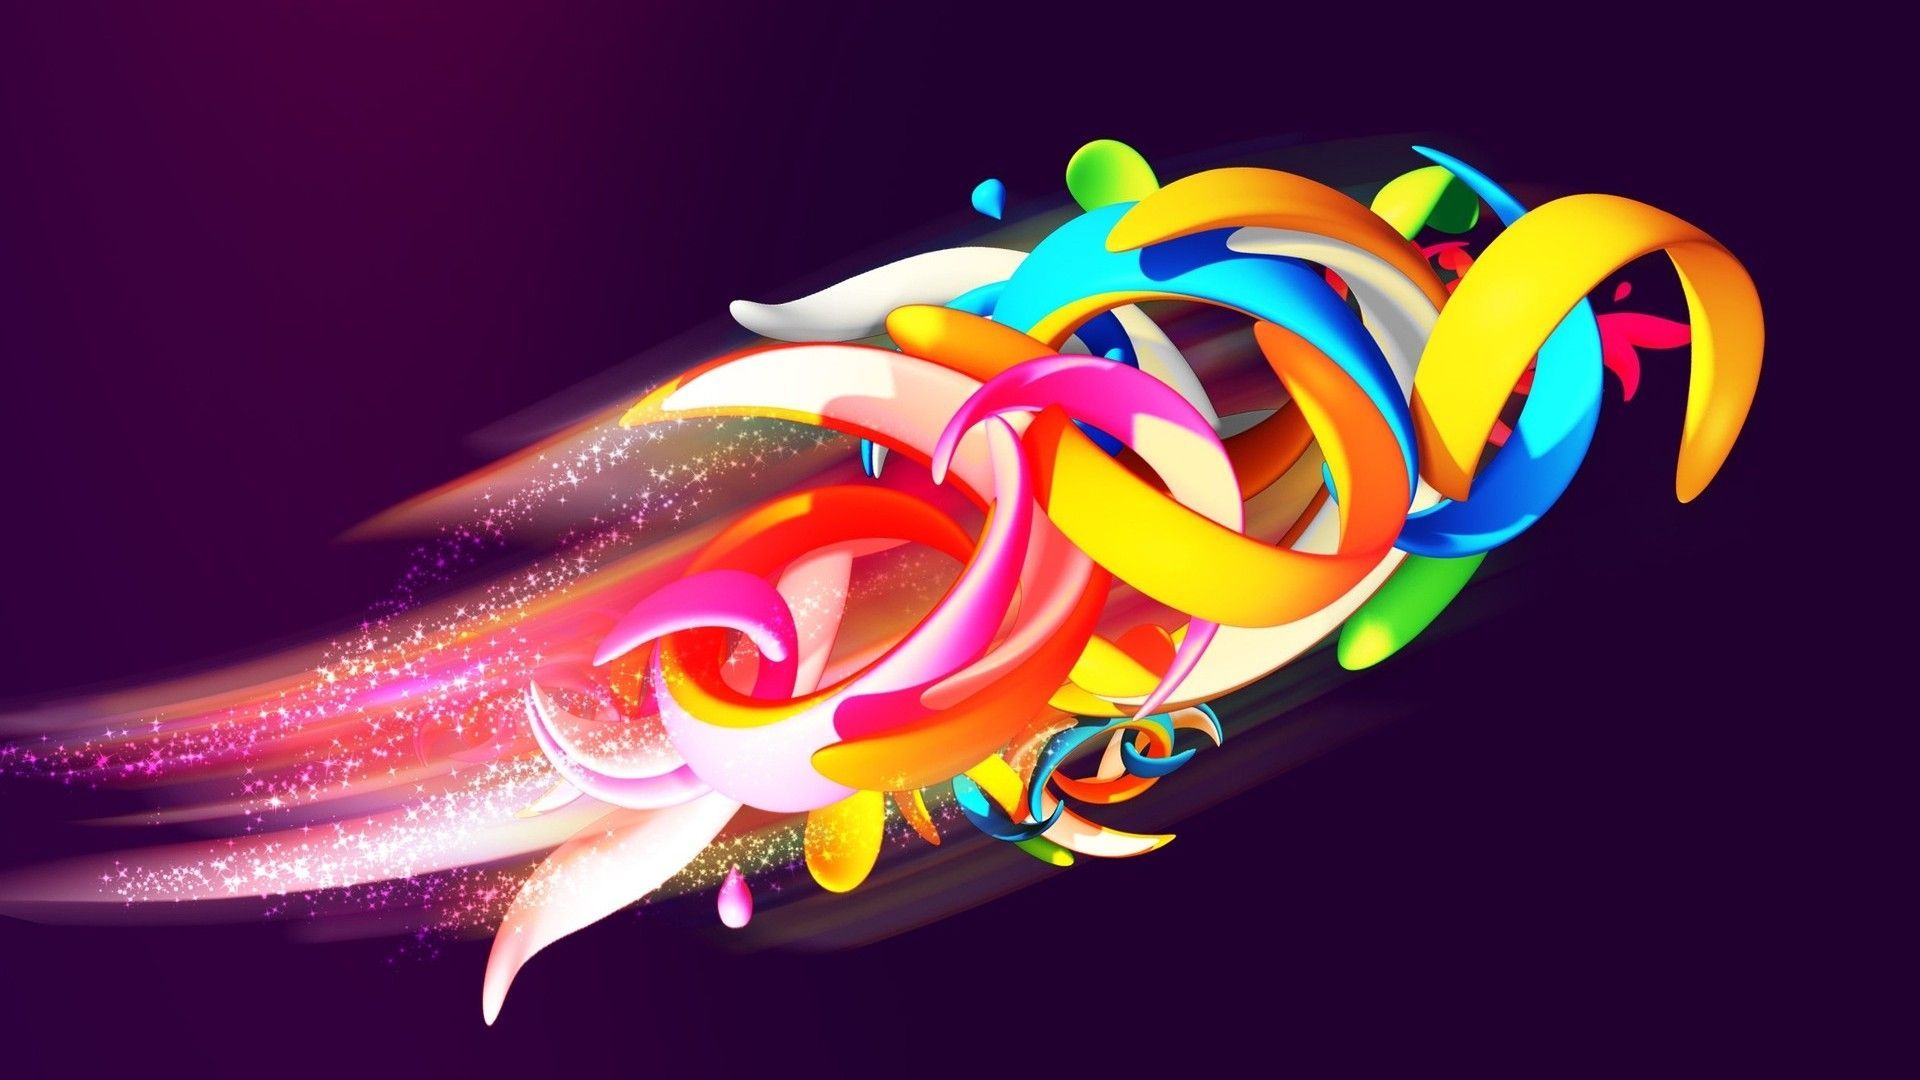 Colorful Shapes Abstract HD Wallpaper. Best facebook cover photo, Abstract wallpaper, Abstract